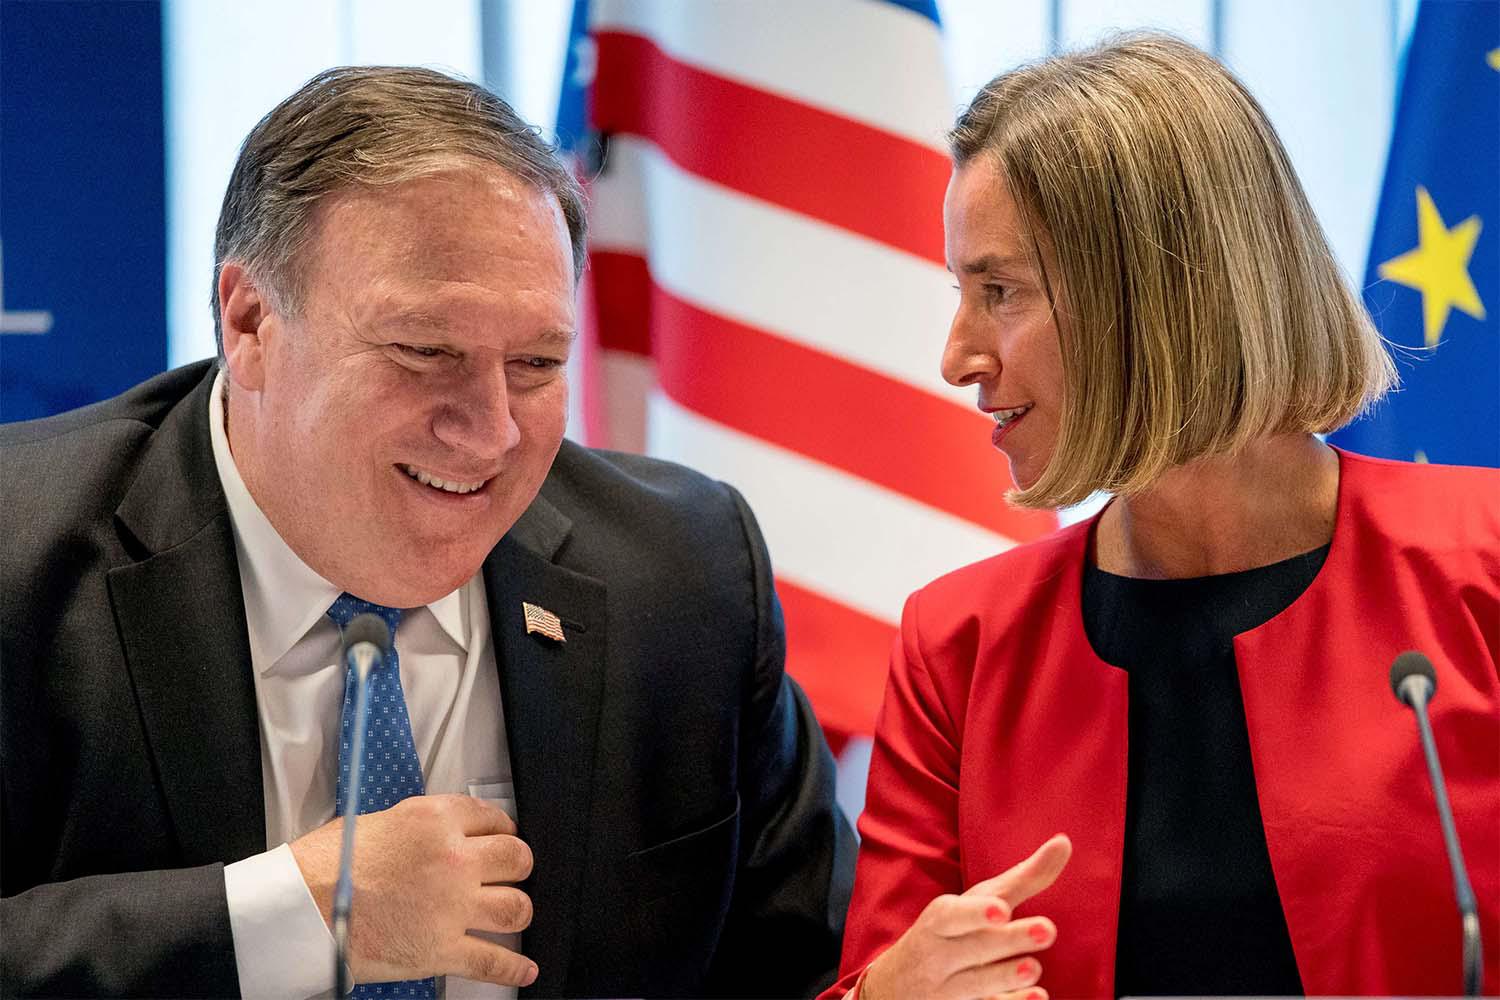 Secretary of State Mike Pompeo, left, and EU Commission Vice President Federica Mogherini